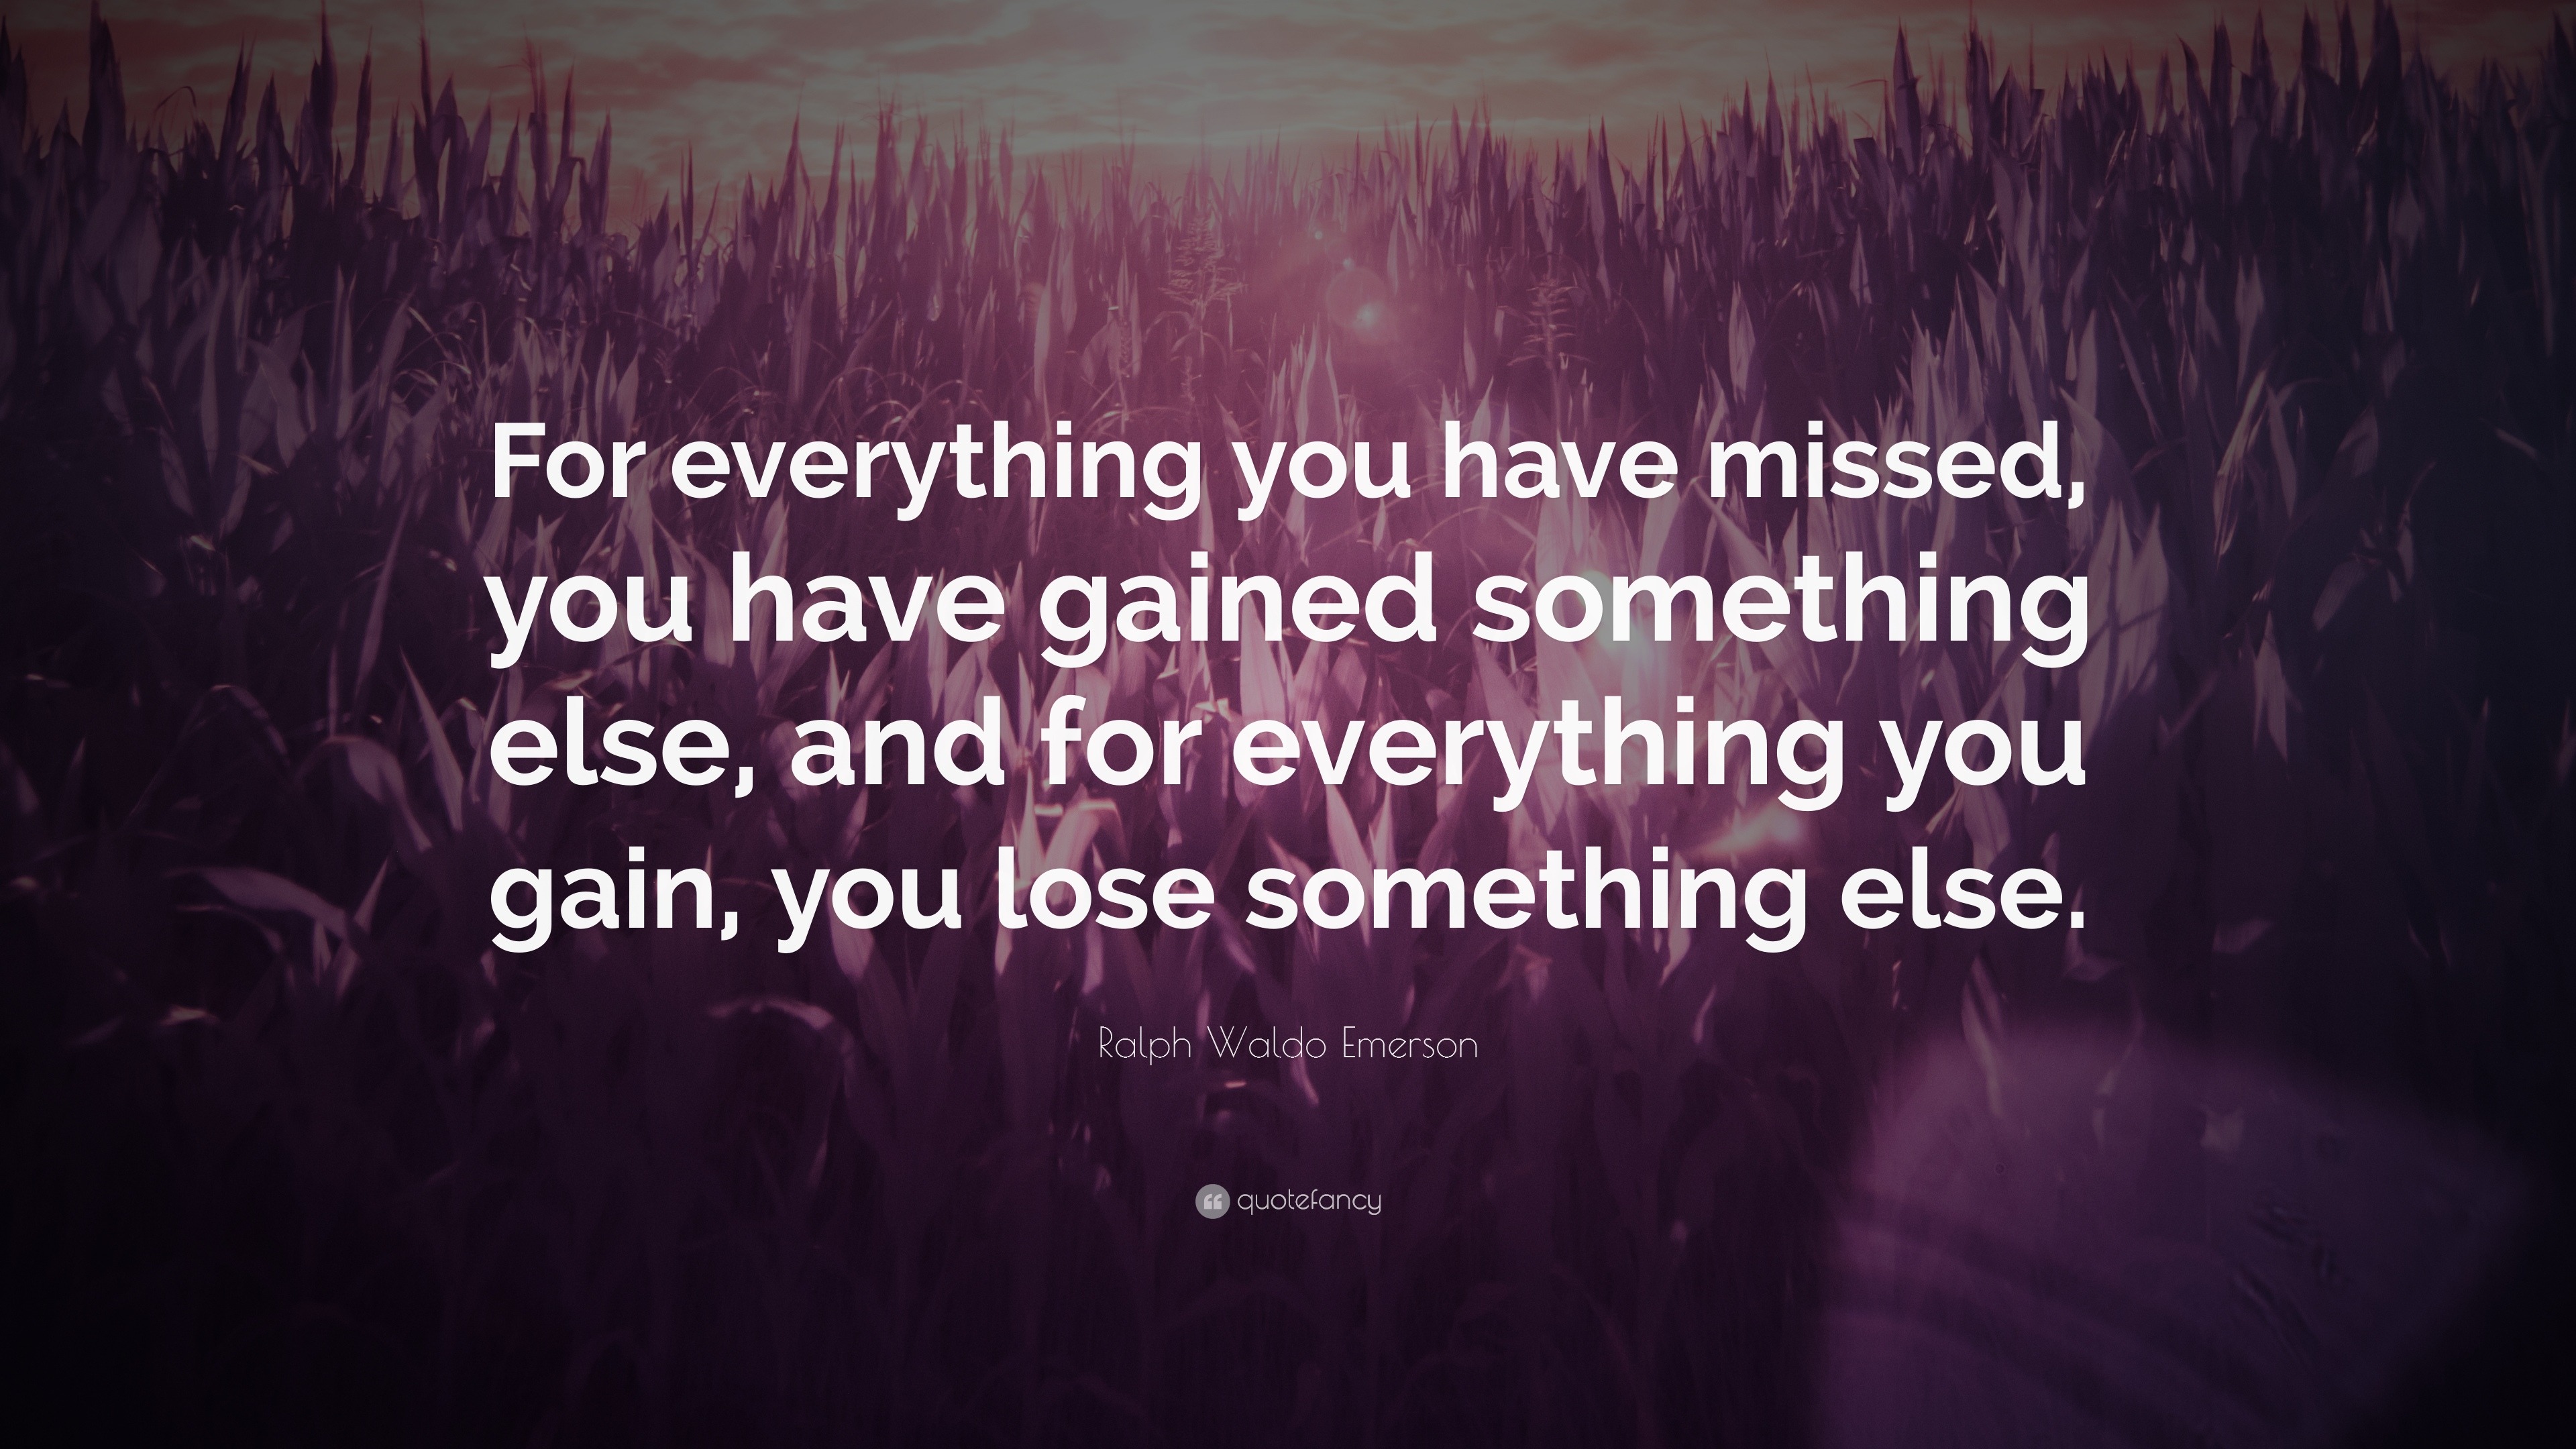 Ralph Waldo Emerson Quote: “For everything you have missed, you have